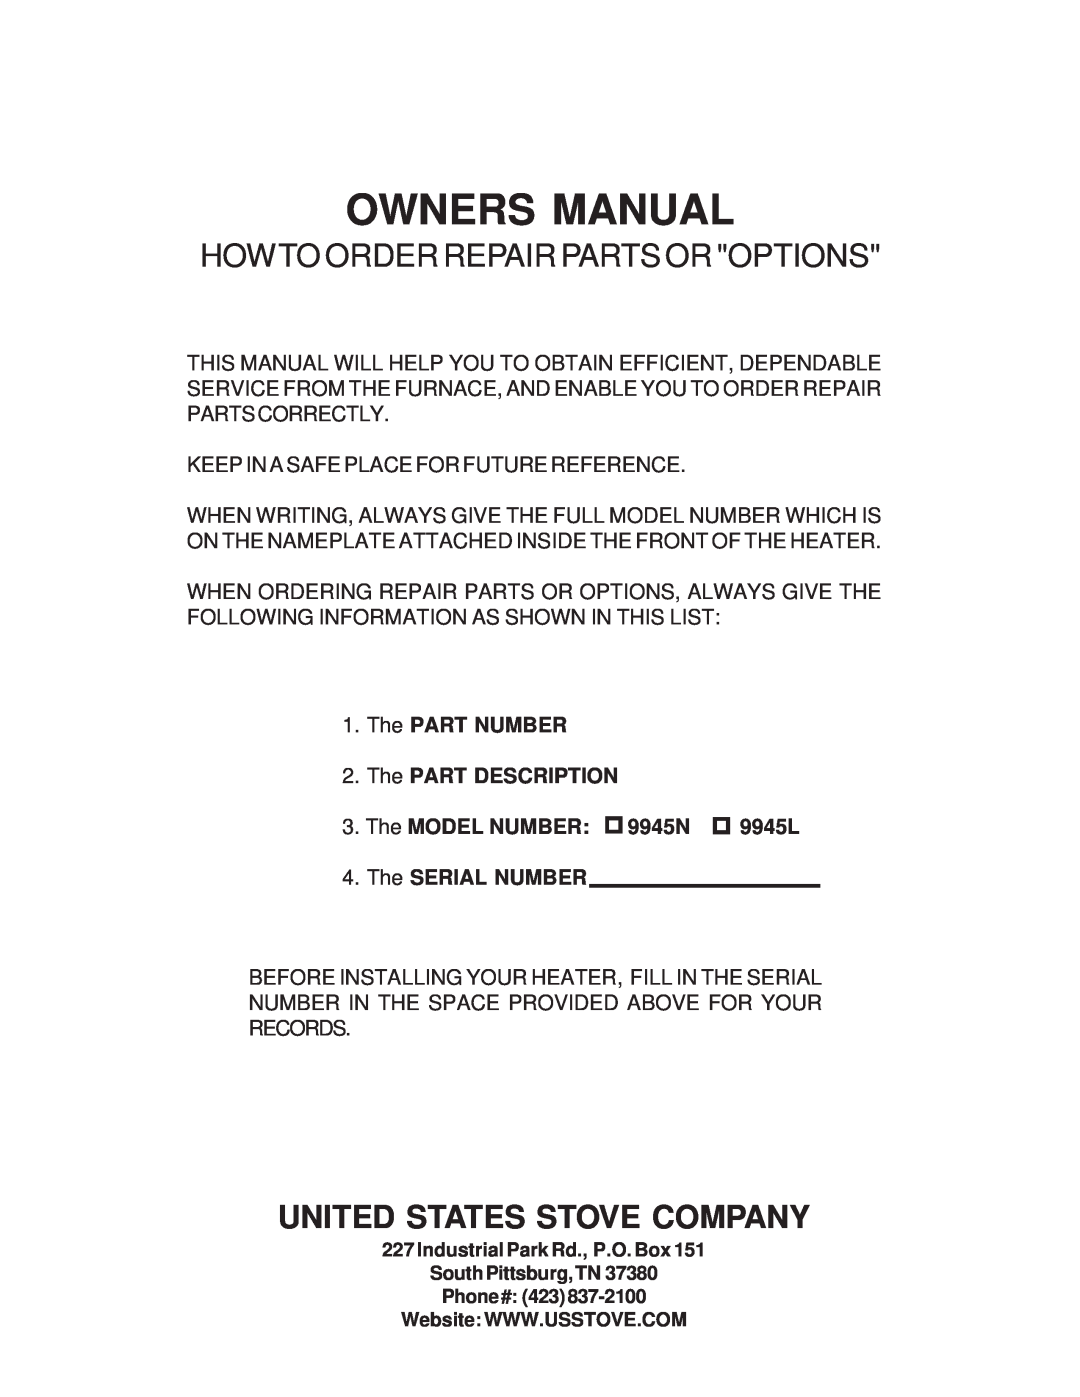 United States Stove B9945L manual United States Stove Company, The PART NUMBER 2.The PART DESCRIPTION 